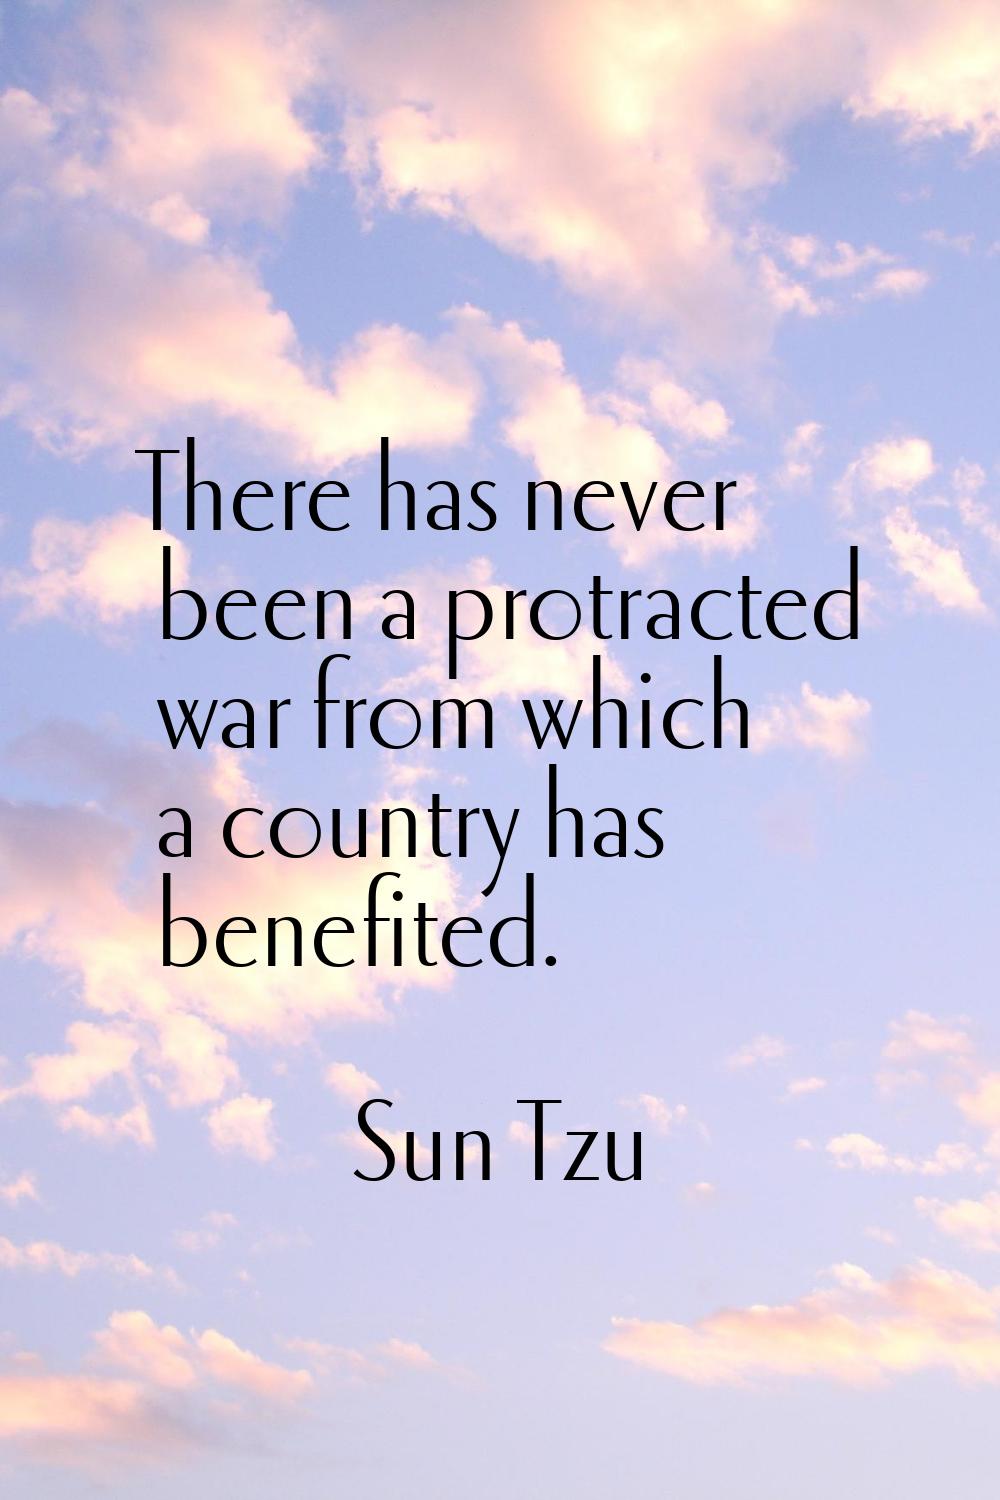 There has never been a protracted war from which a country has benefited.